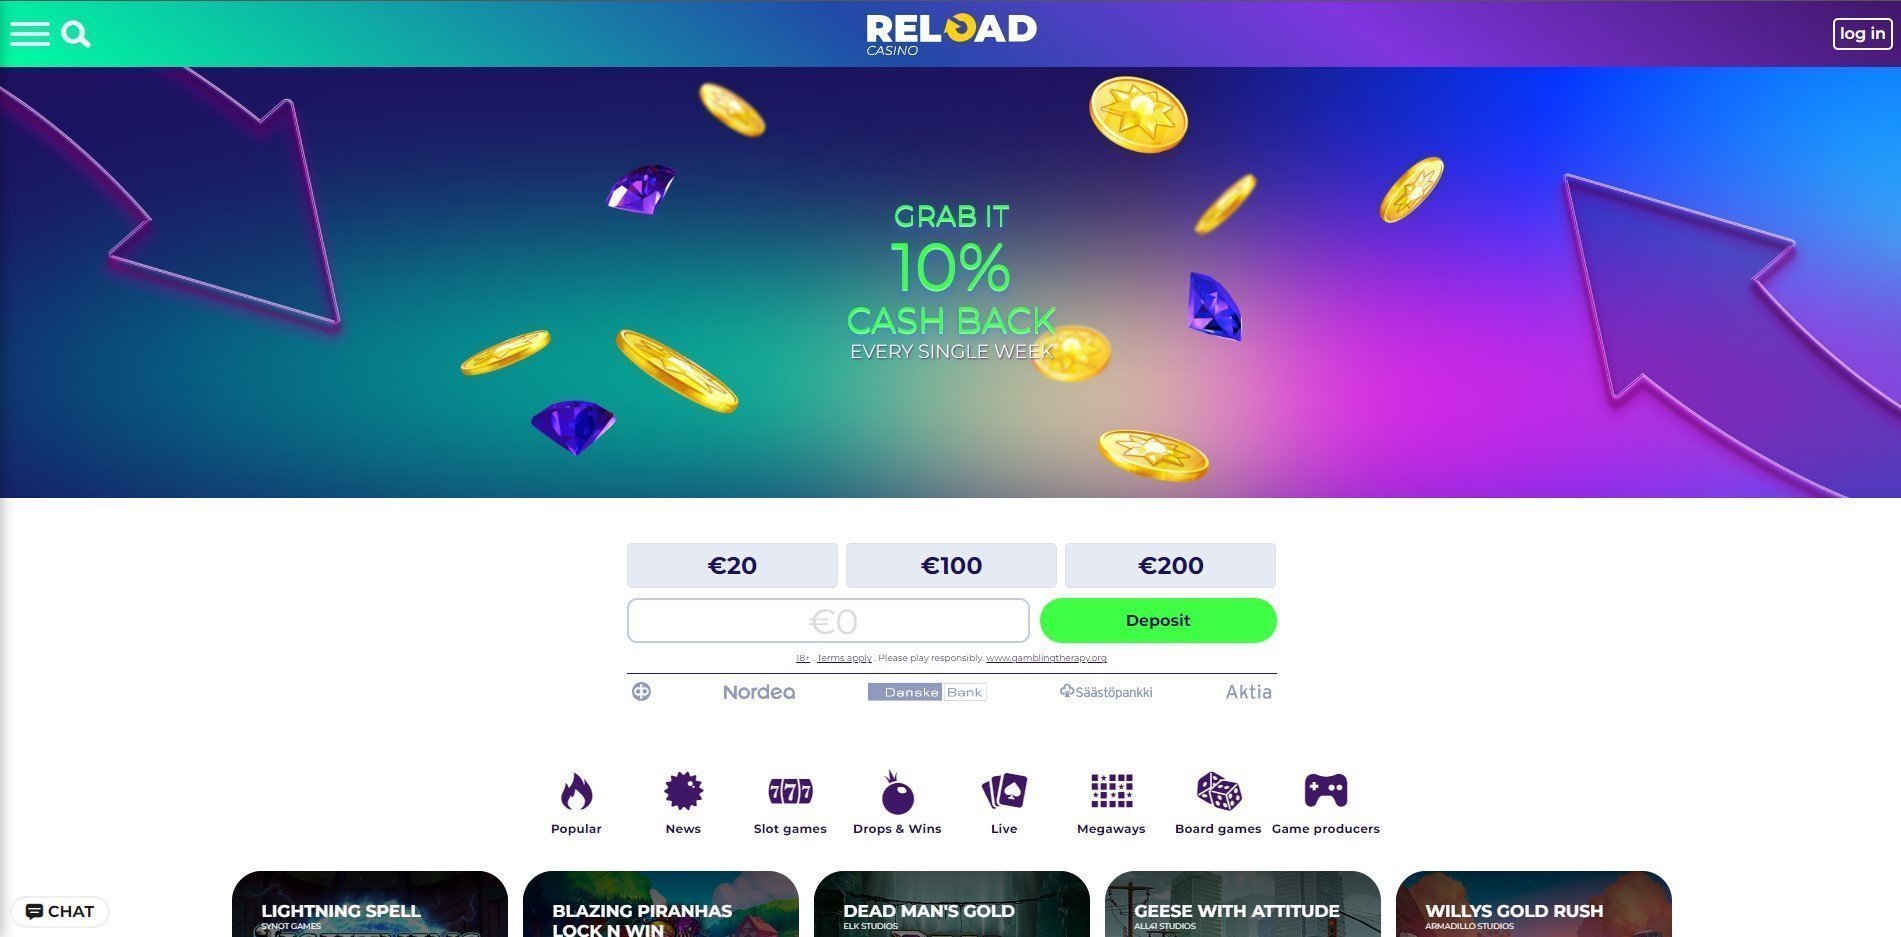 Reload Casino Review